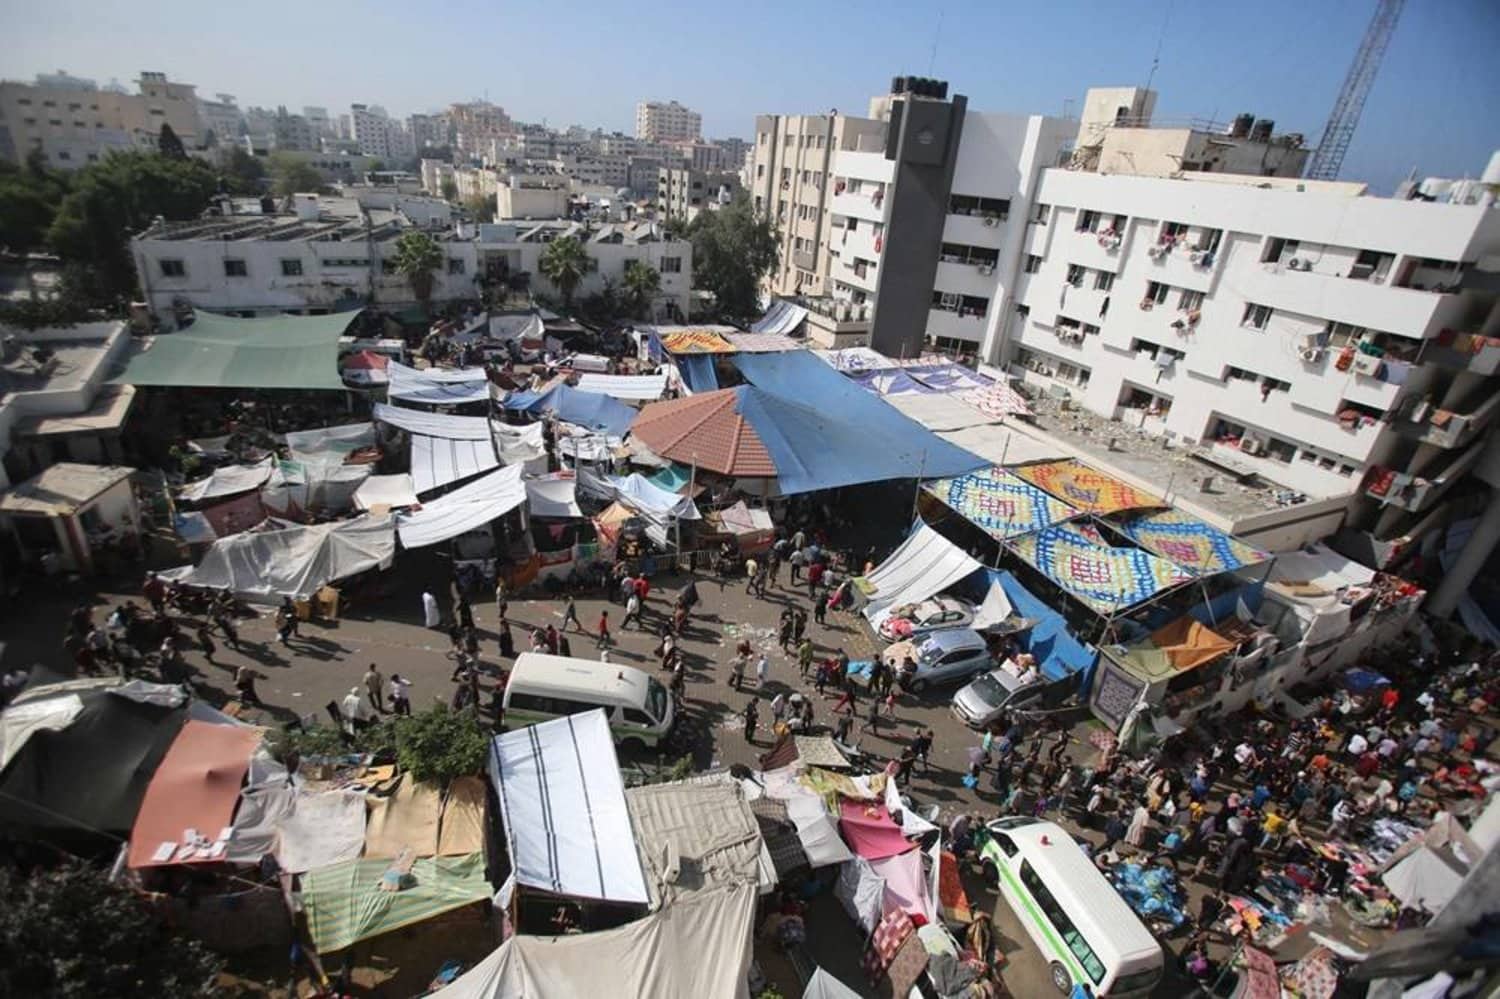 Hundreds and thousands of Palestinians forced to find homes in camps and shelters (Credits: Asharq Al Awsat)